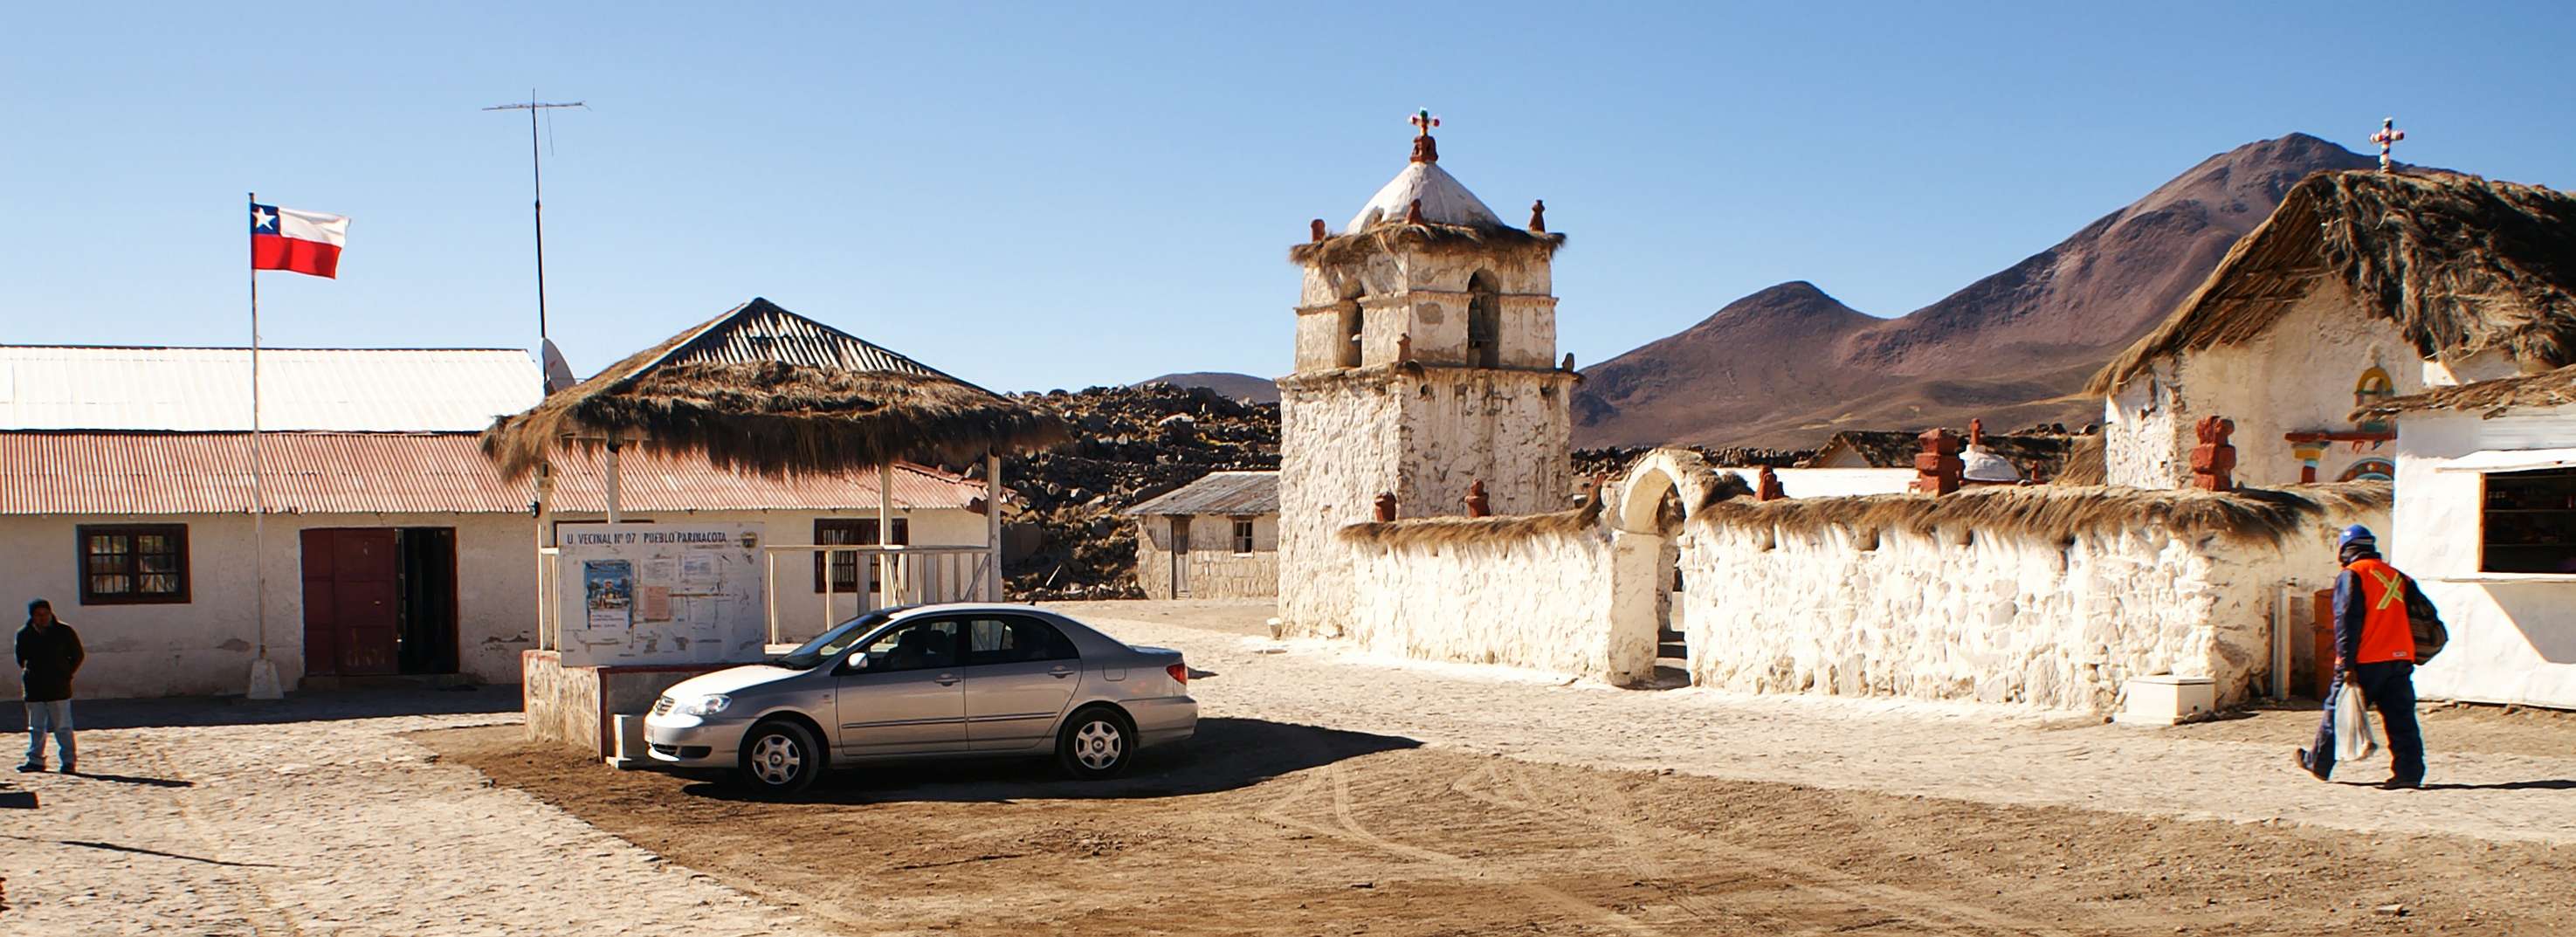 Parinacota | Central plaza with church